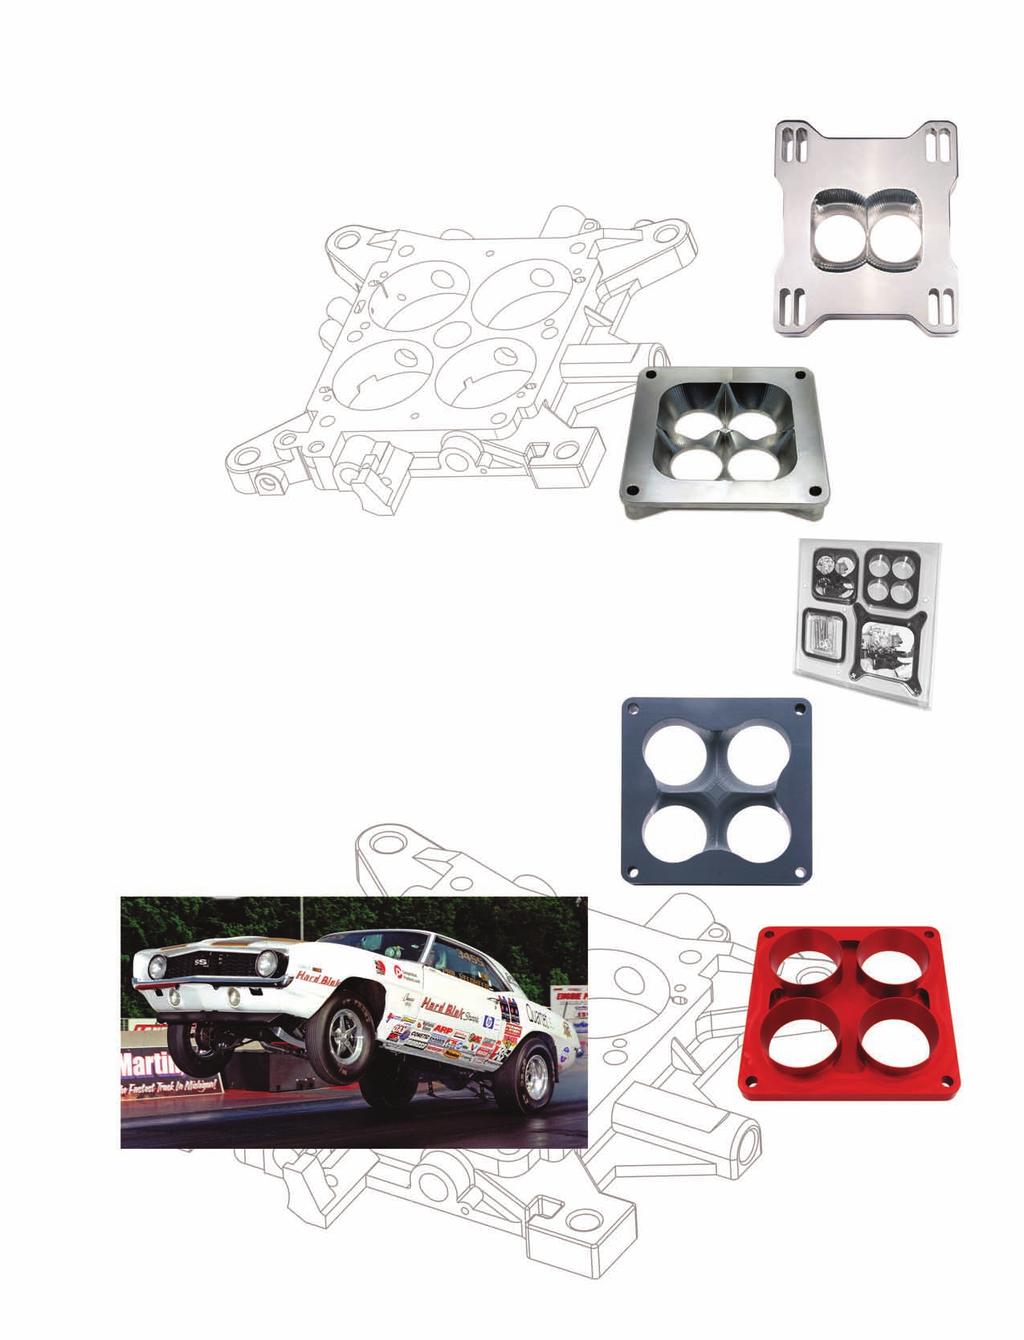 Transition Blend Carburetor Spacers Common knowledge and experience tells us that open spacers help topend power and four-hole spacers help mid-range power.